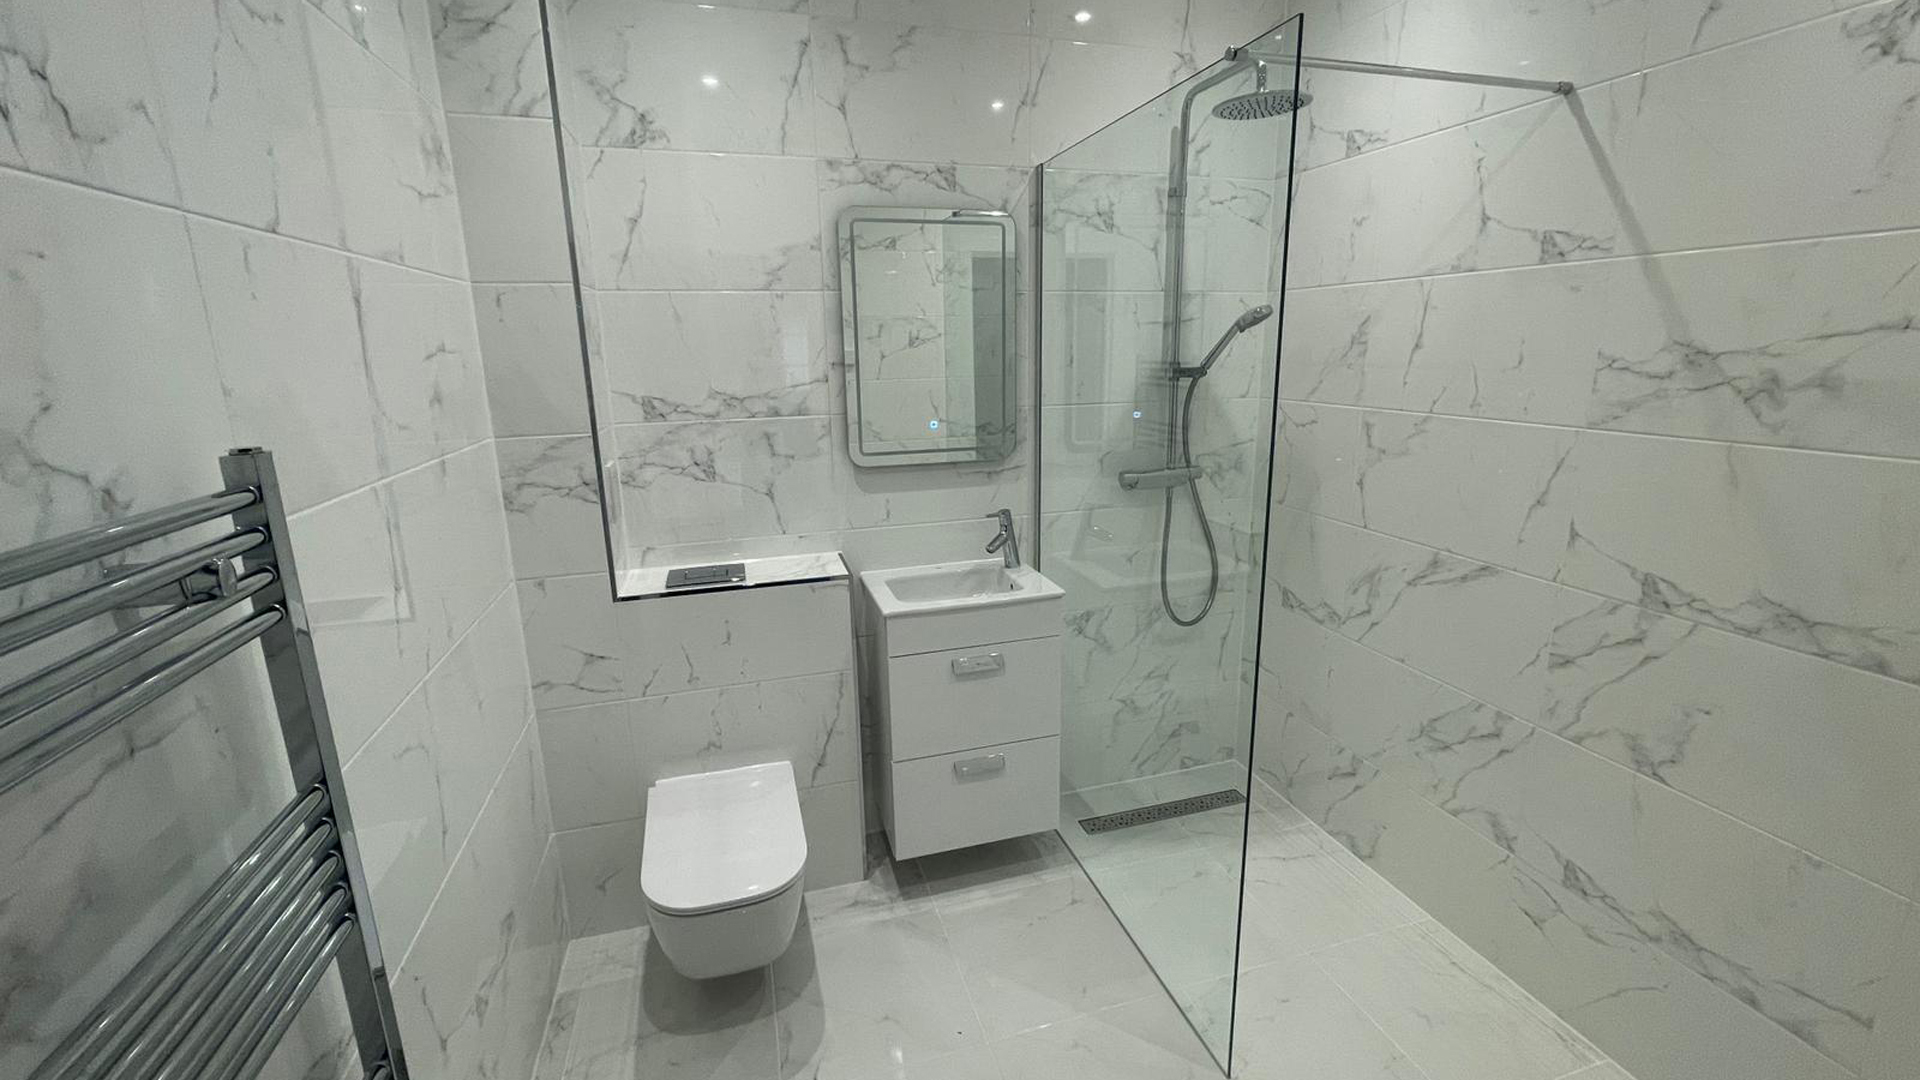 Shower room with white marbled tiles, mirror and chrome towel rail